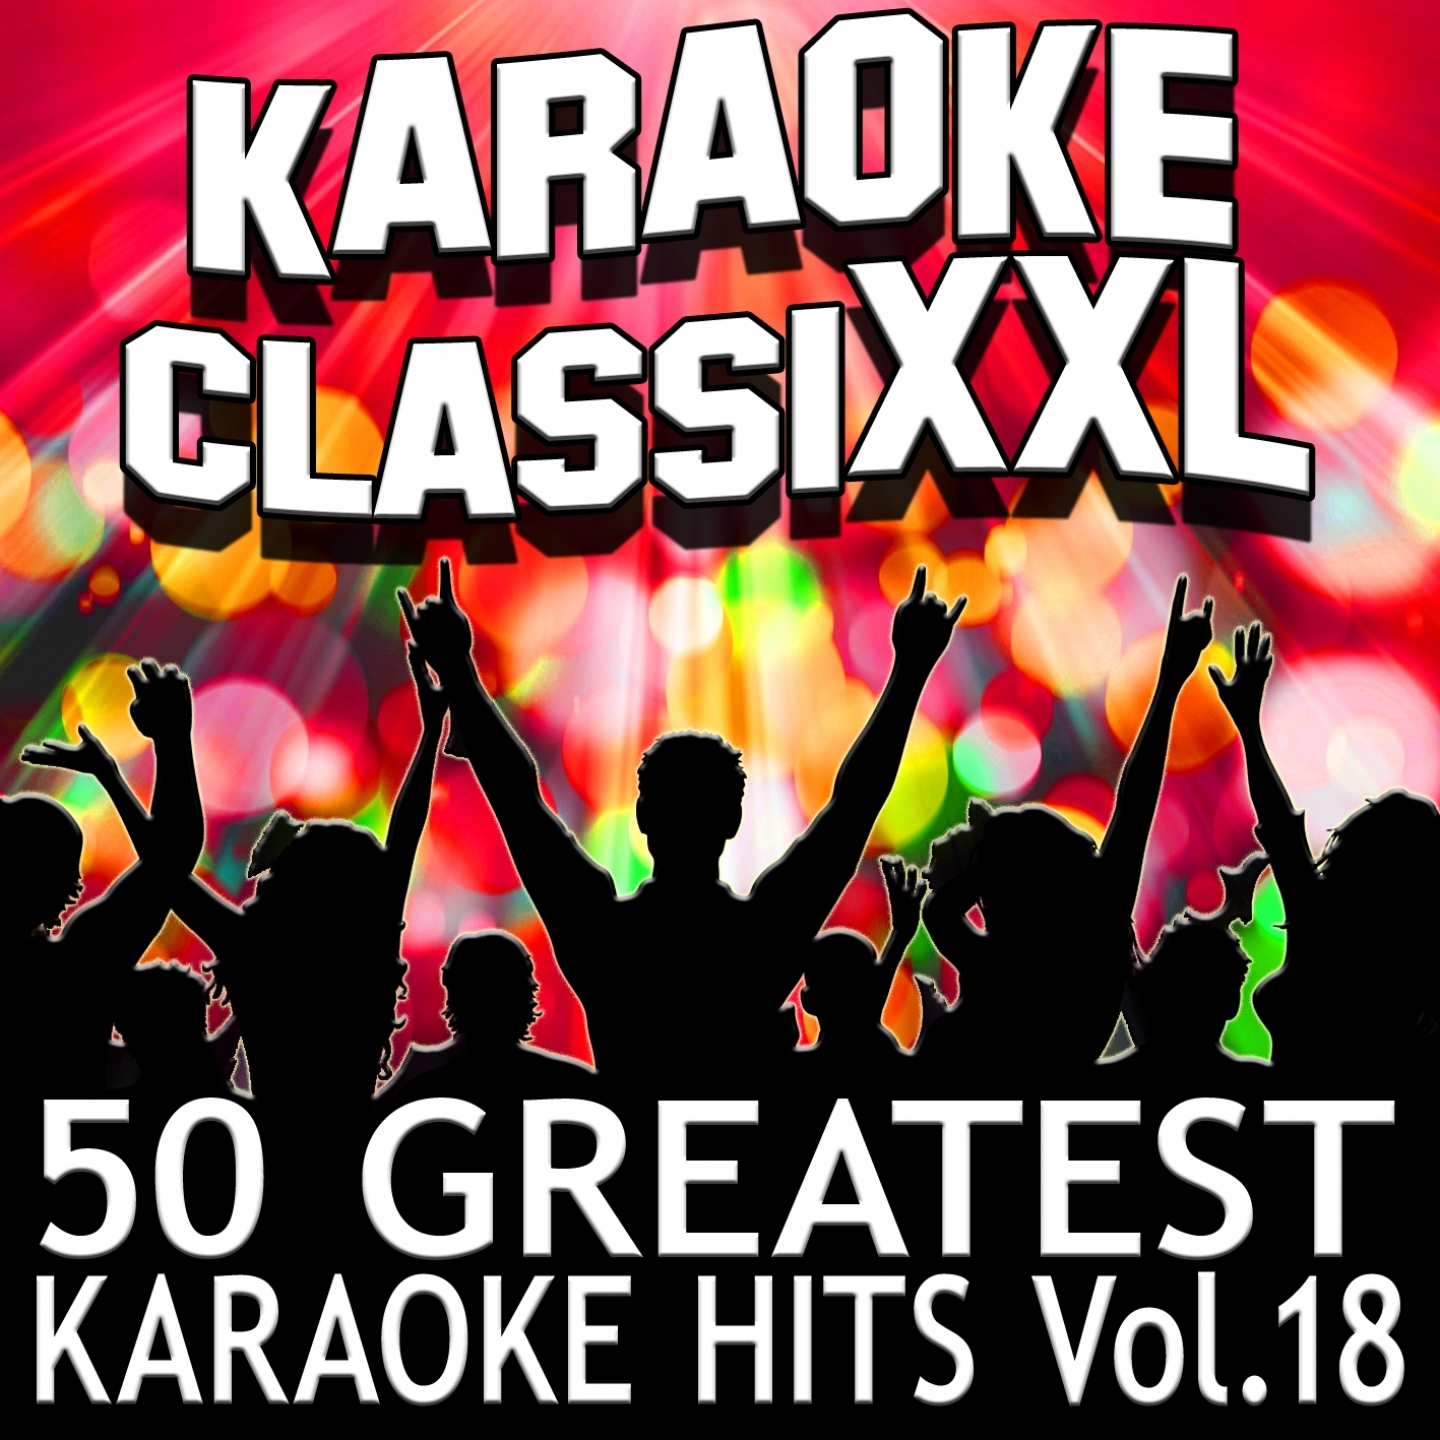 Have You Ever Been in Love (Karaoke Version) (Originally Performed By Leo Sayer)